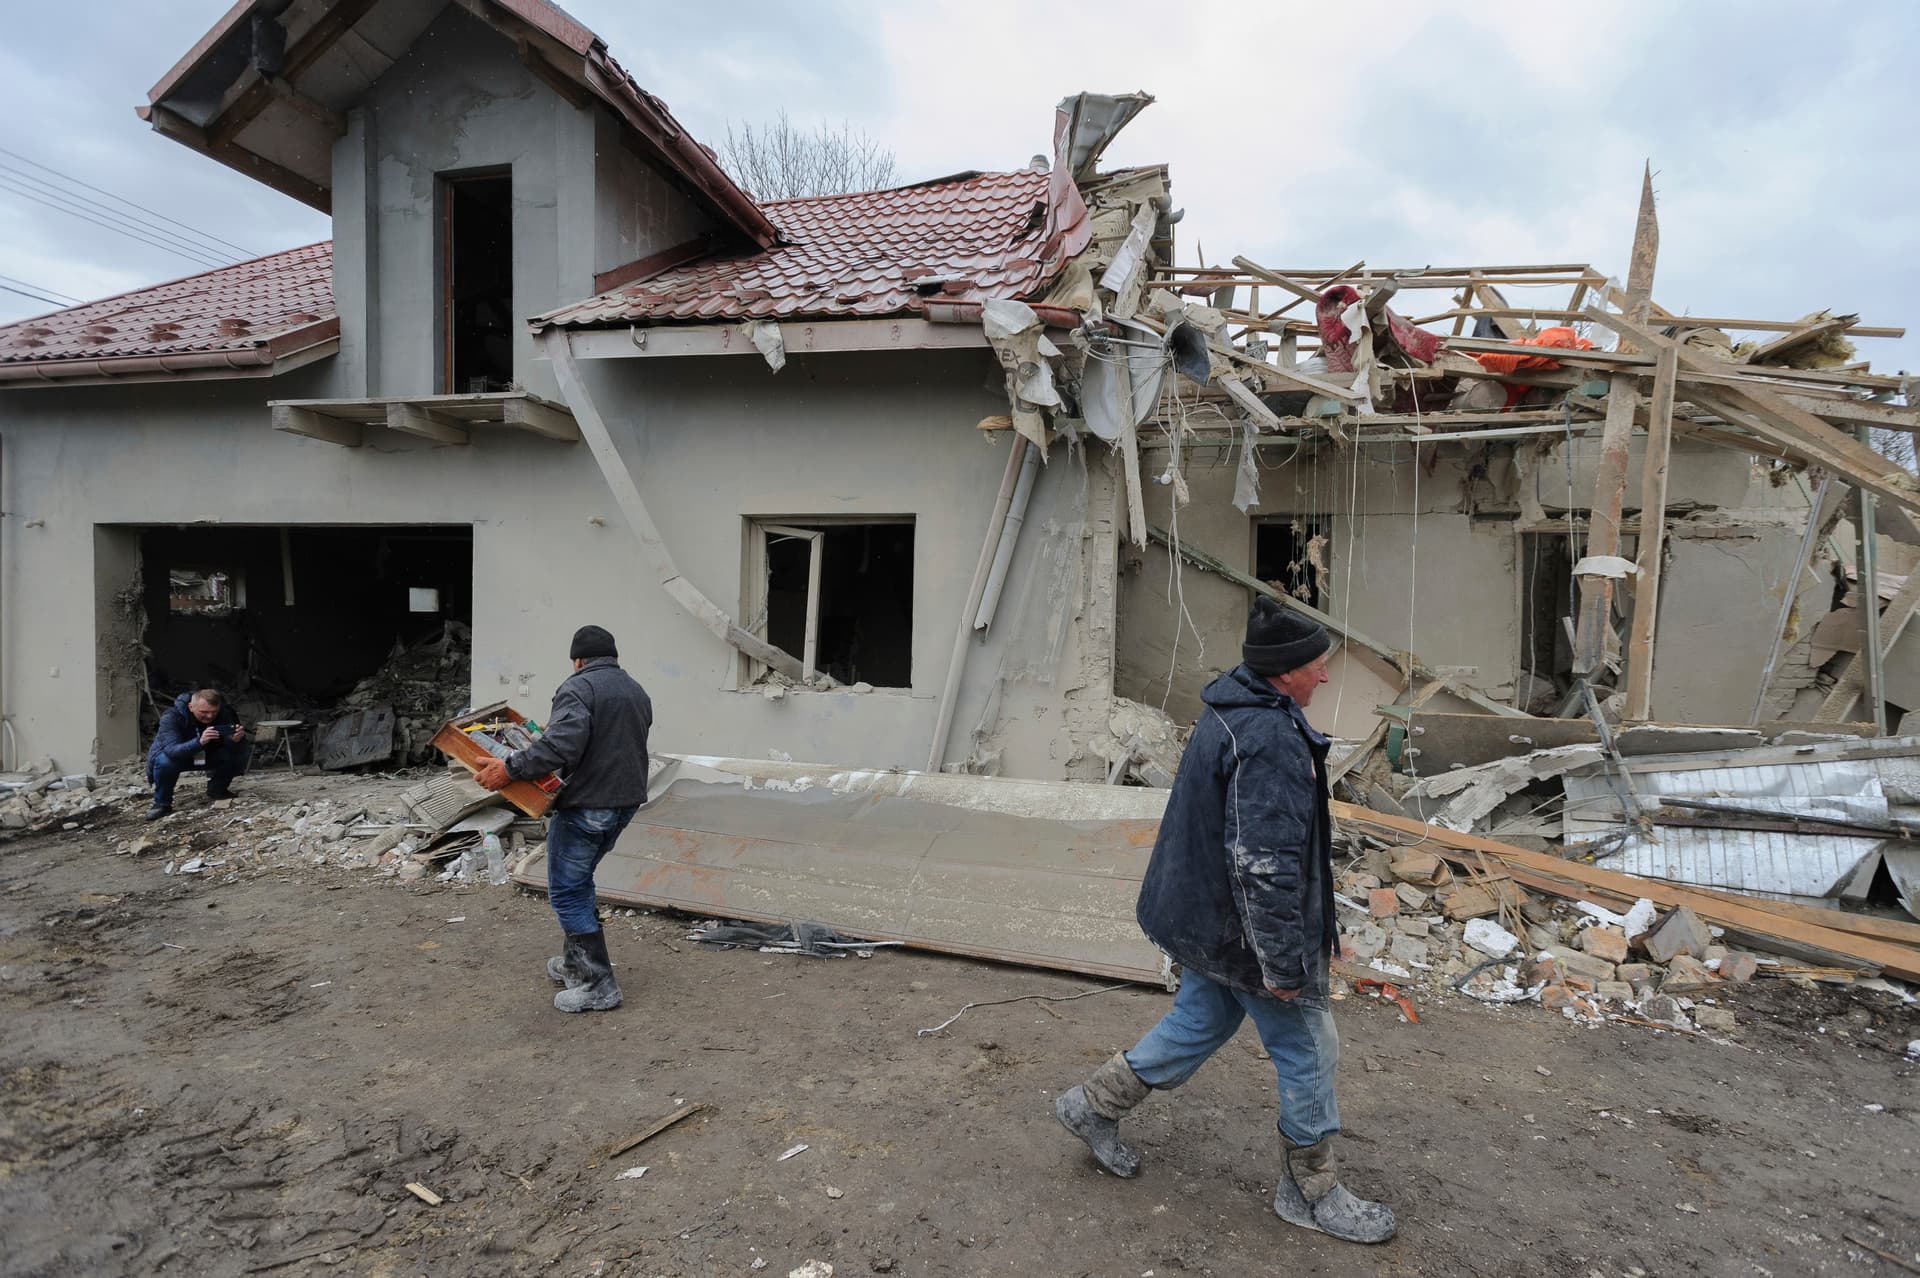 Villagers clear the rubble from a destroyed home in the village in Zolochevskiy